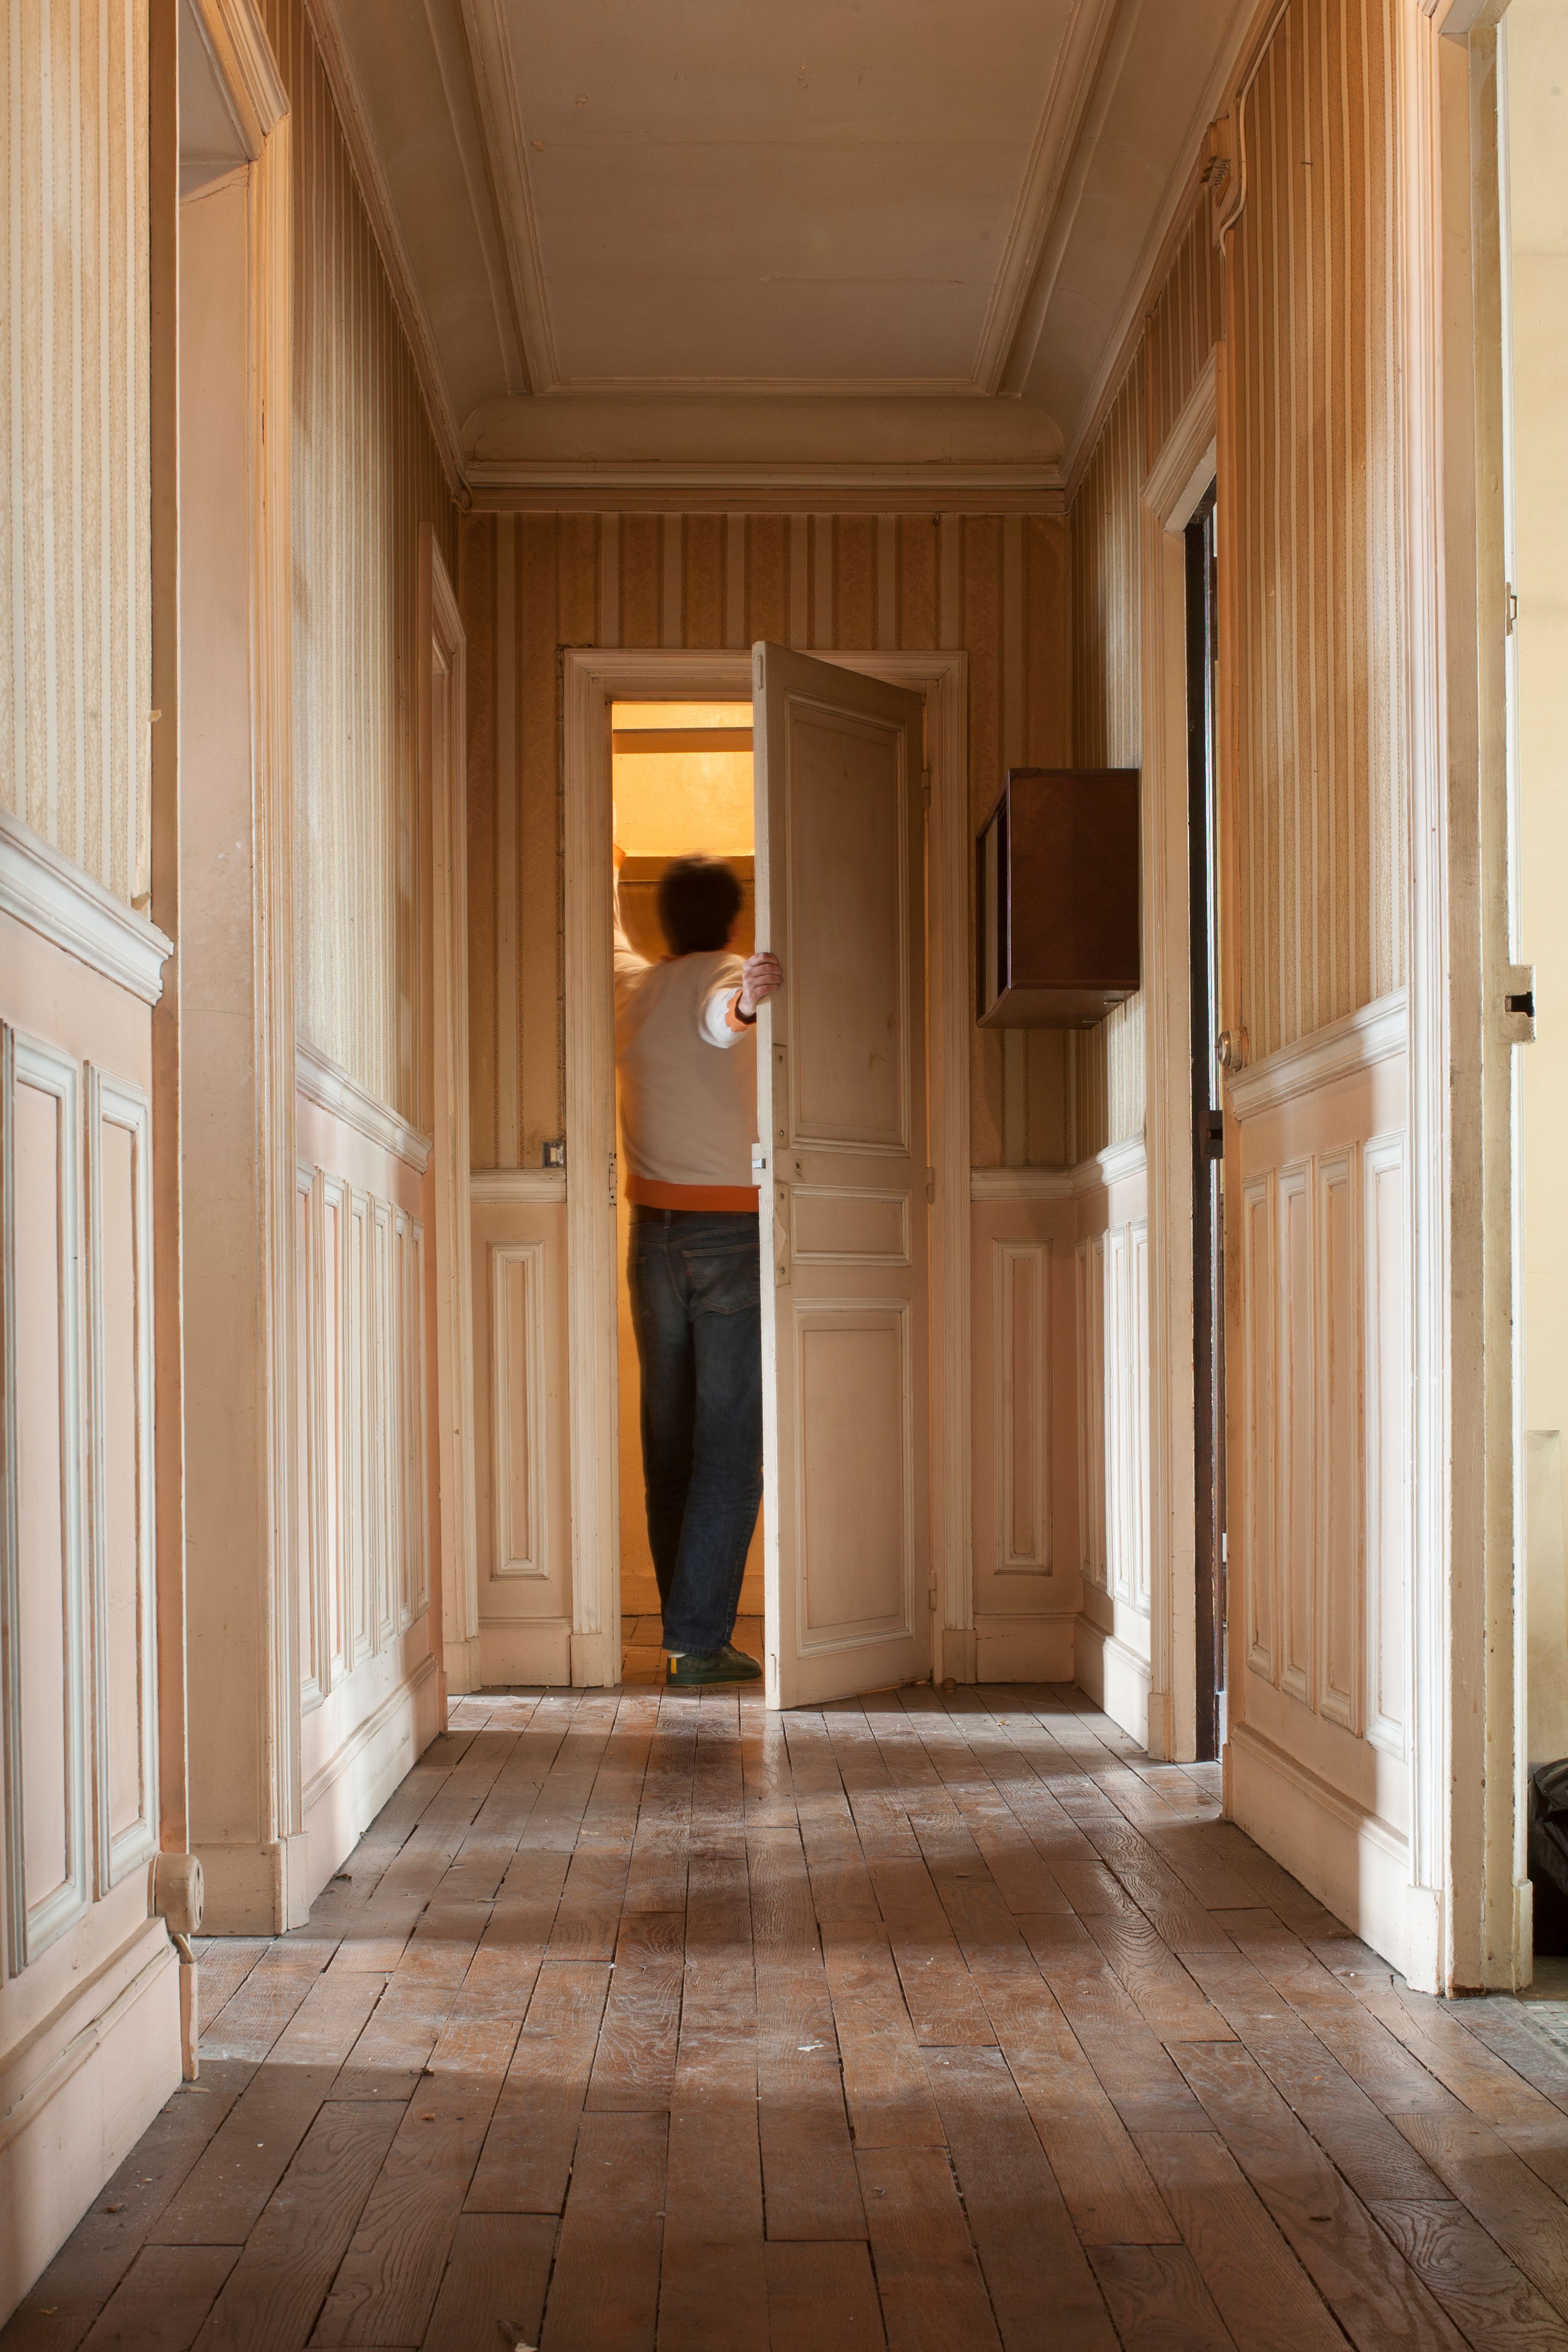 A man opening a door down a hallway. | Source: Getty Images